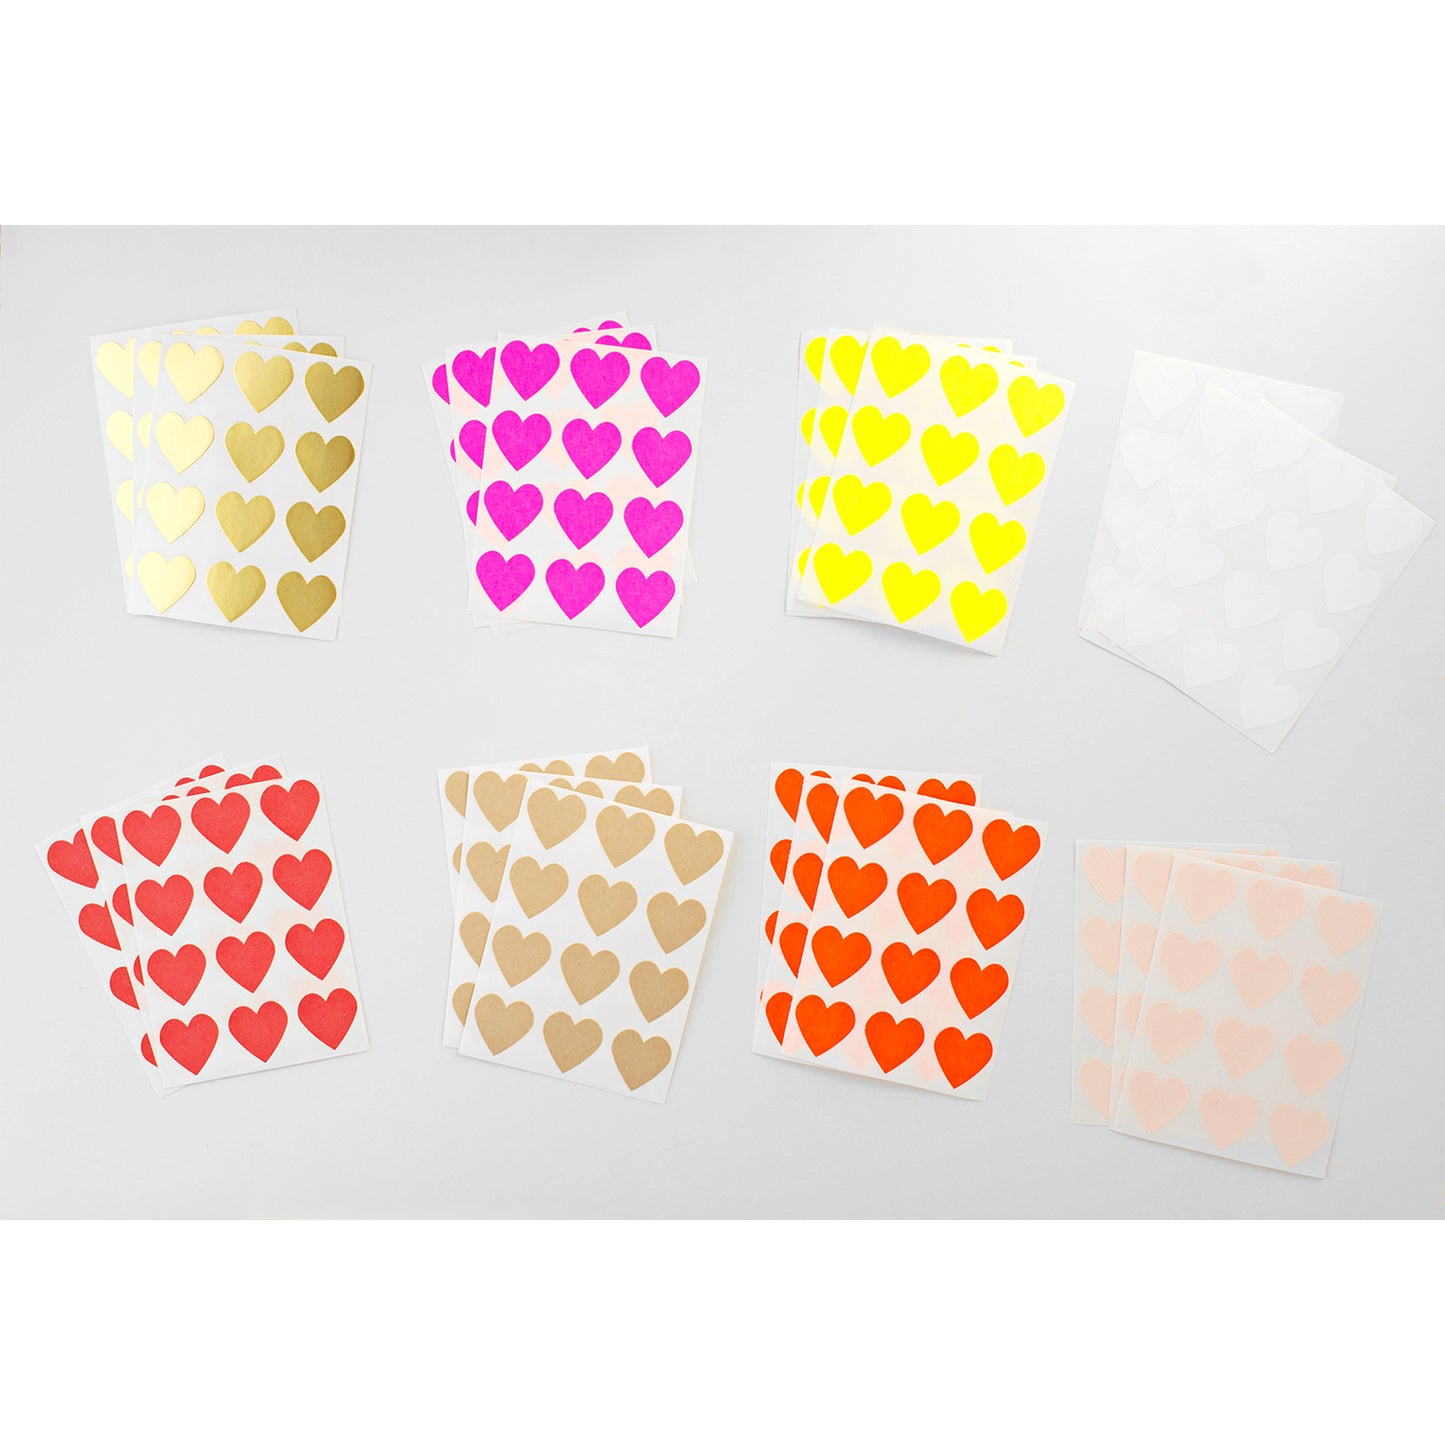 Knot & Bow Heart Stickers Set of 36 | 8 Colors 